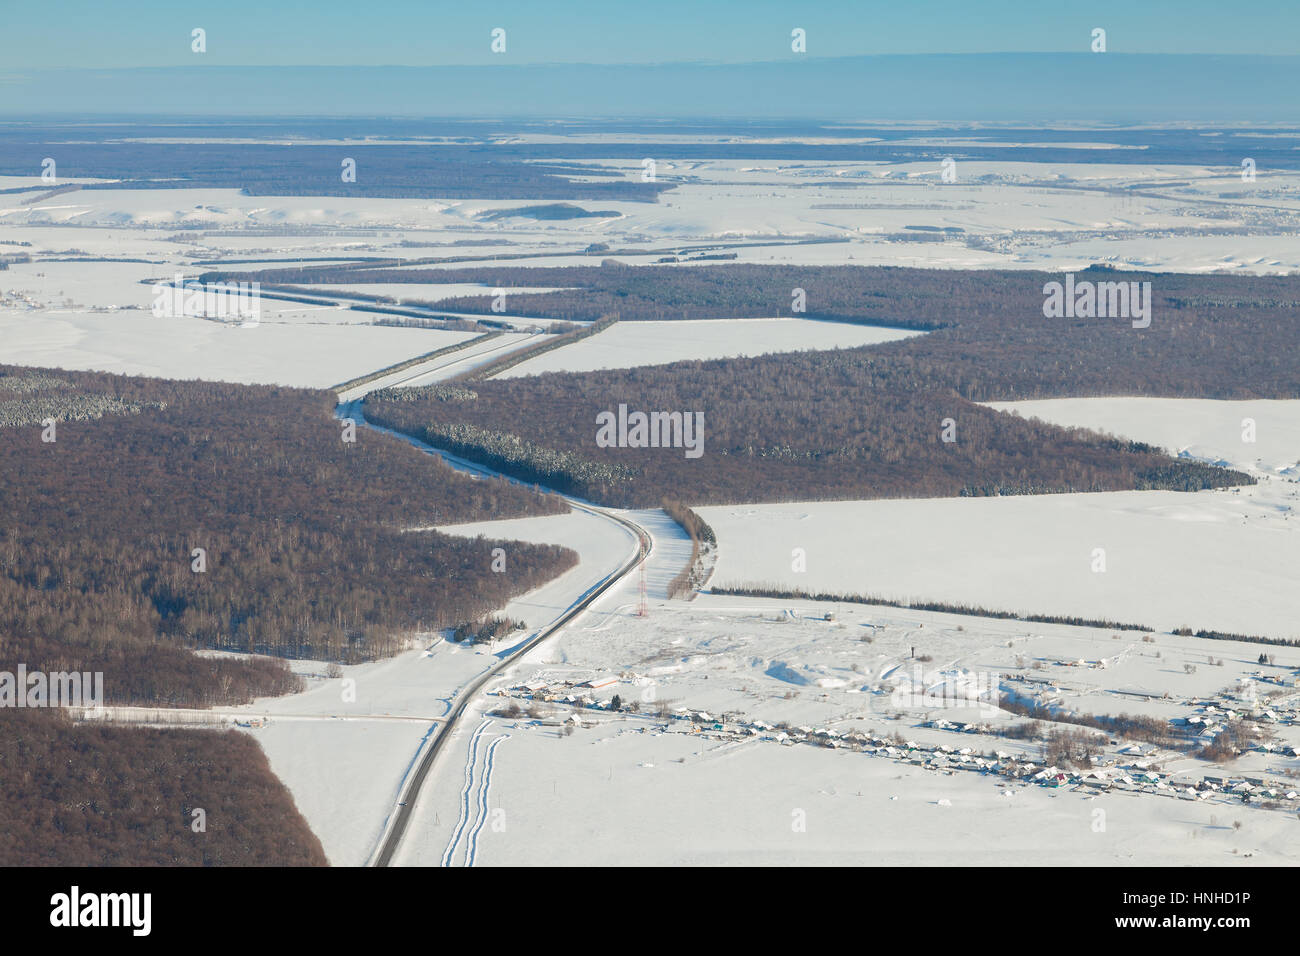 aerial view over snowy field and road Stock Photo